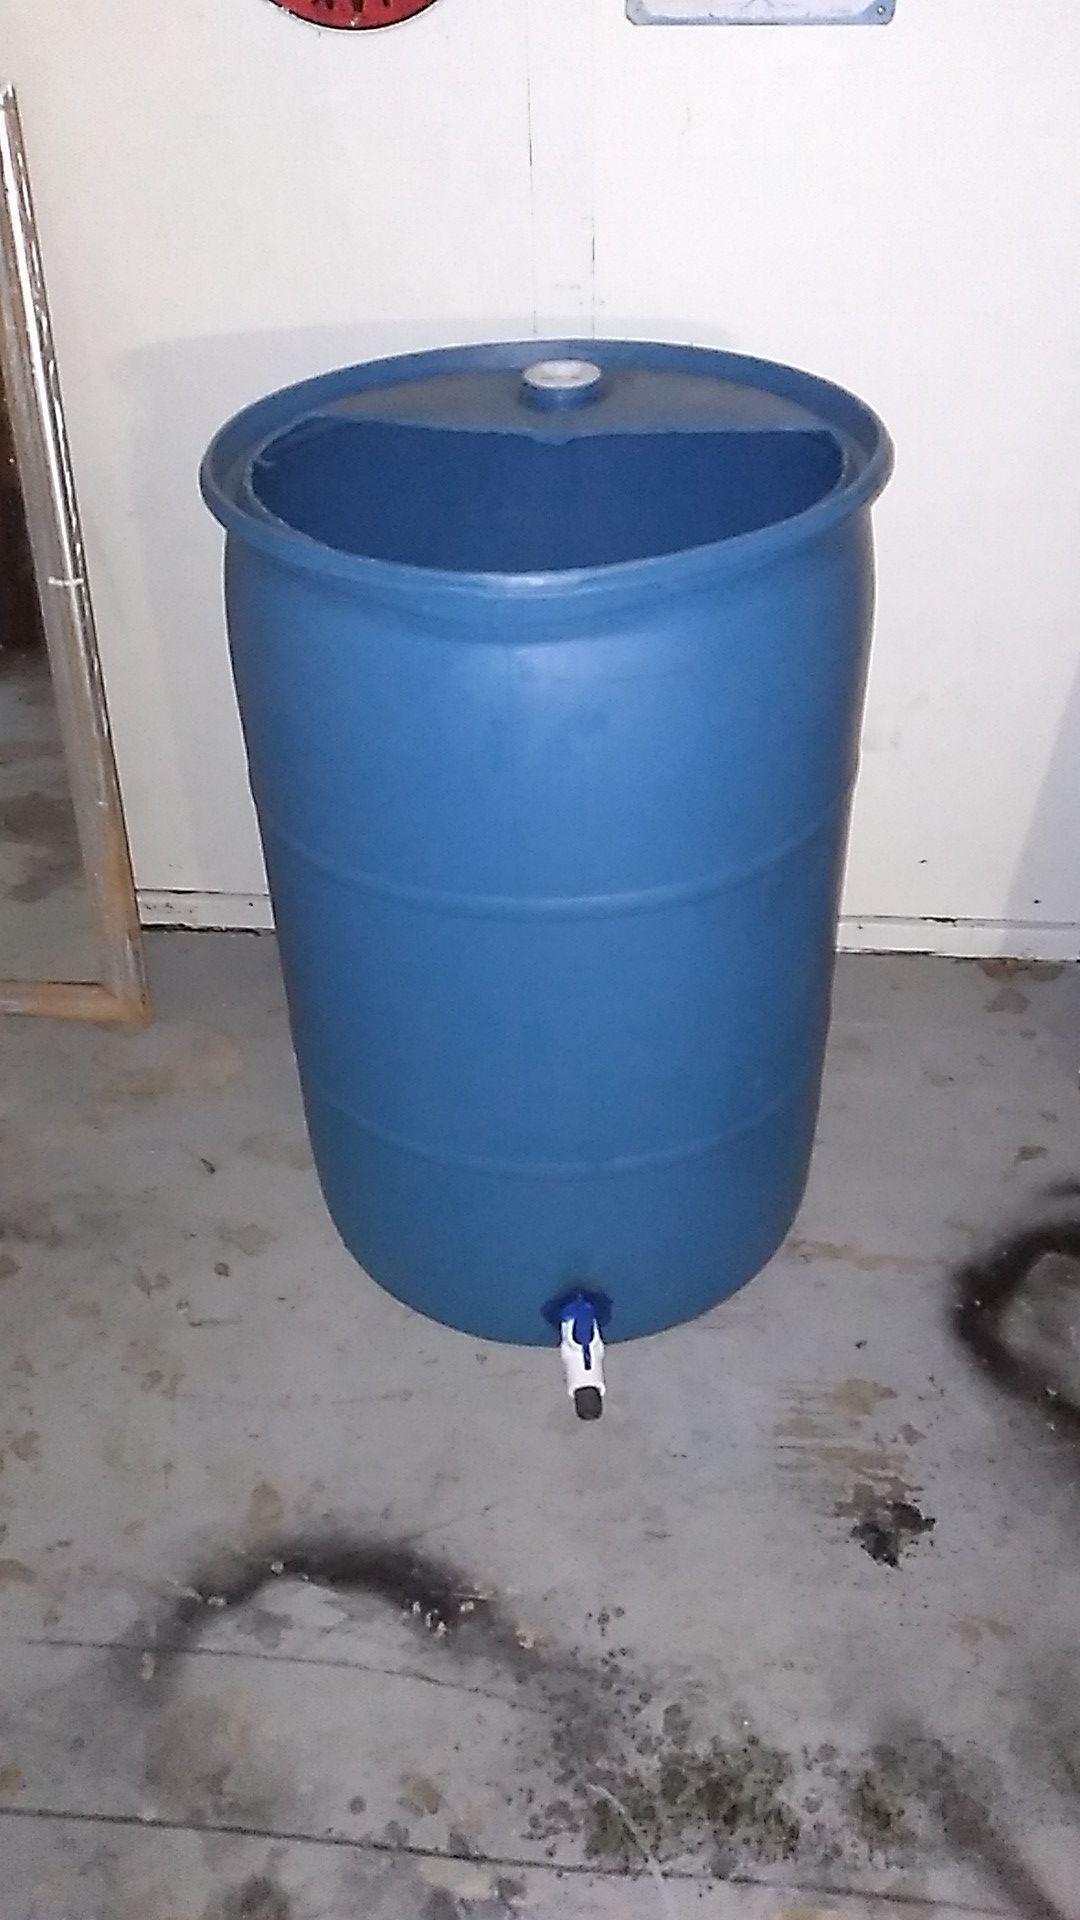 55 gallon water tank/barrel/drum w/ new 3/4 water spout ready for water hose.